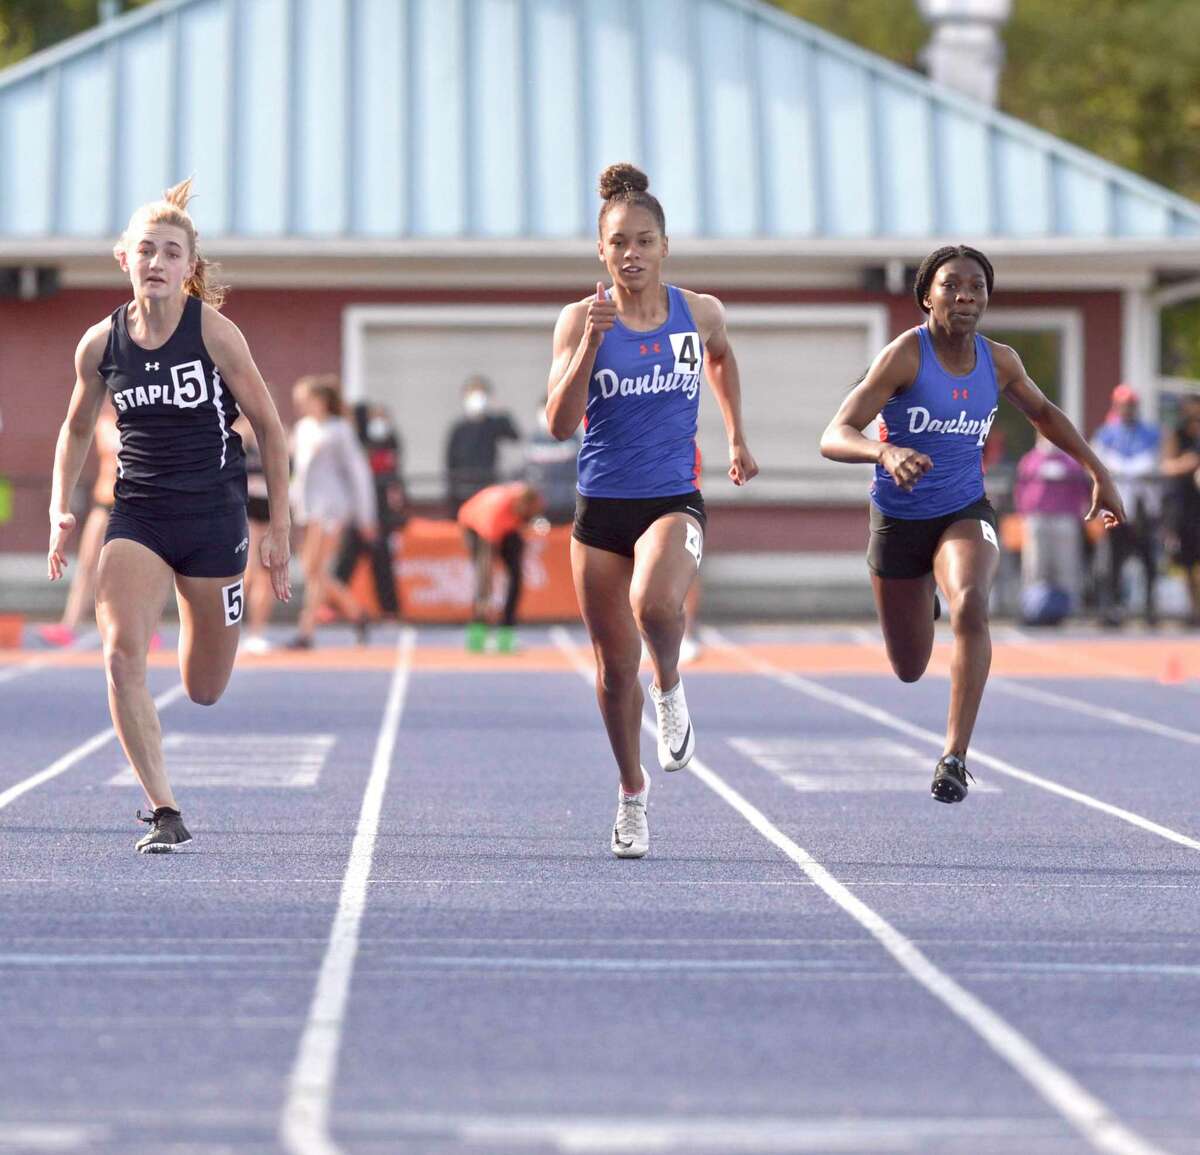 Danbury’s Alanna Smith, center, finished first in the 100 meter dash at the FCIAC championship pn May 24. Staples’ Francine Stevens, left, and Danbury’s Florence Dickson, right, follow.